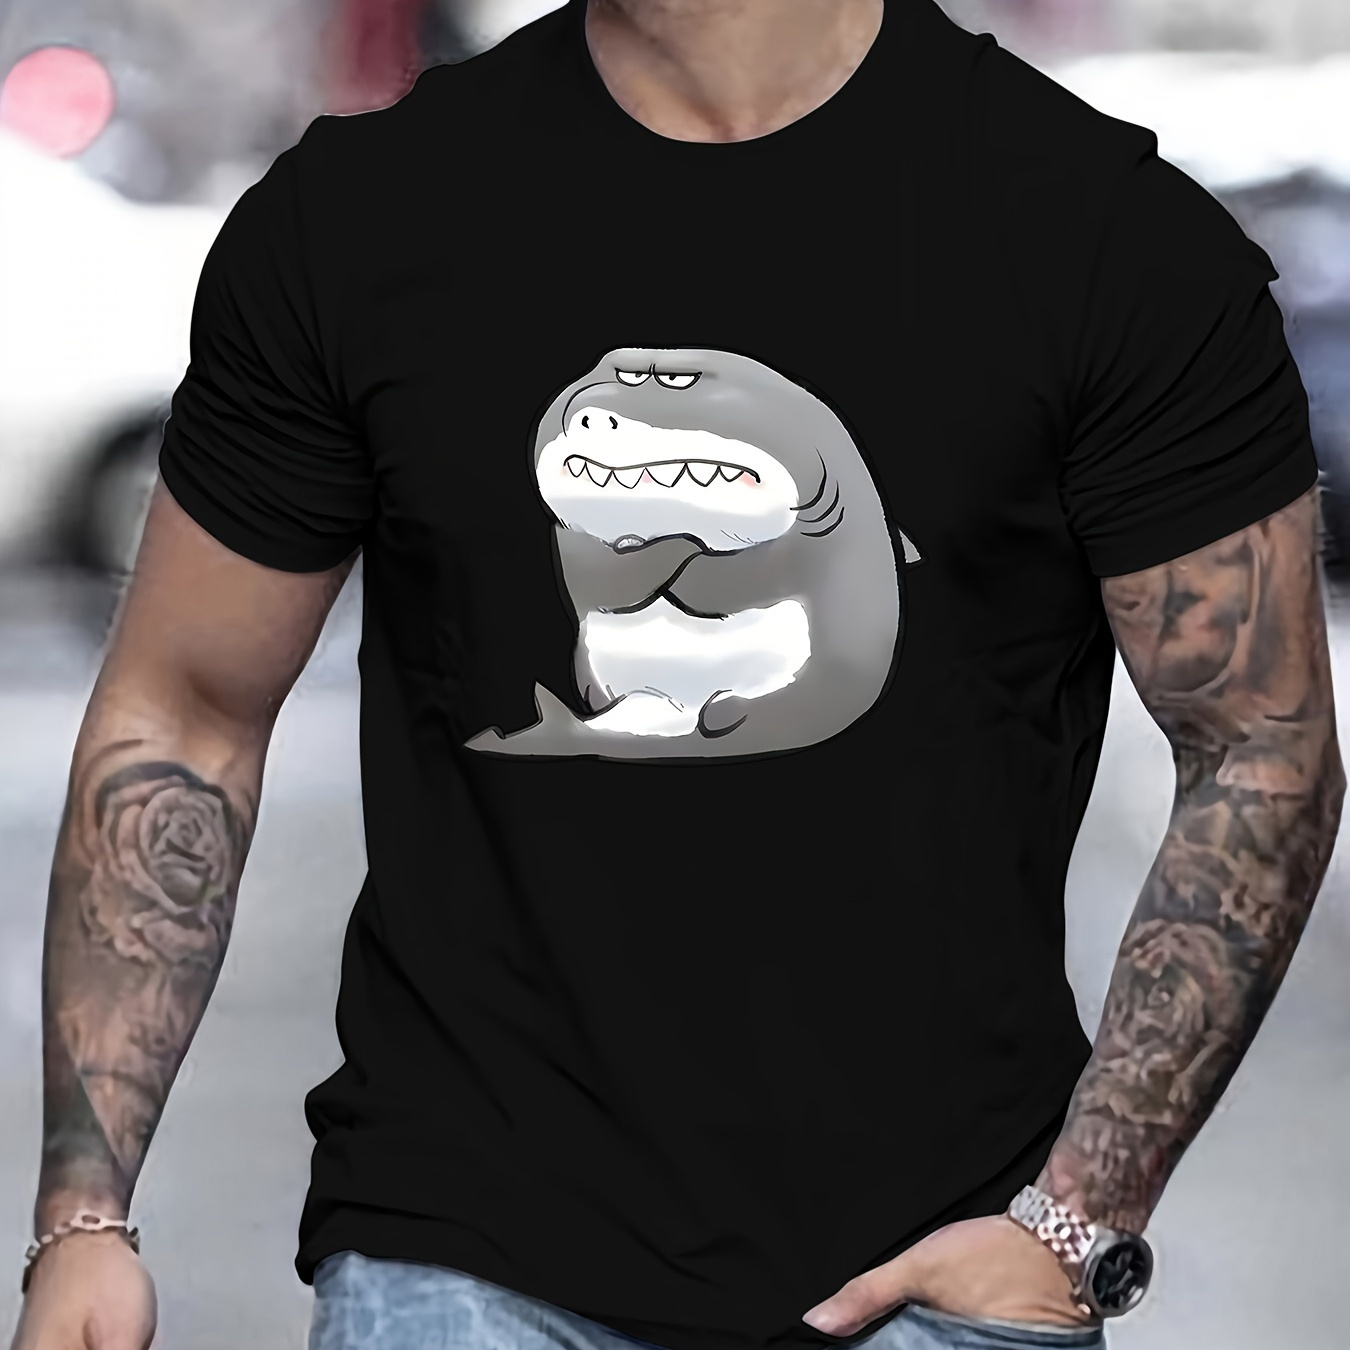 

Angry Shark Graphic Print Men's Creative Top, Casual Short Sleeve Crew Neck T-shirt, Men's Clothing For Summer Outdoor